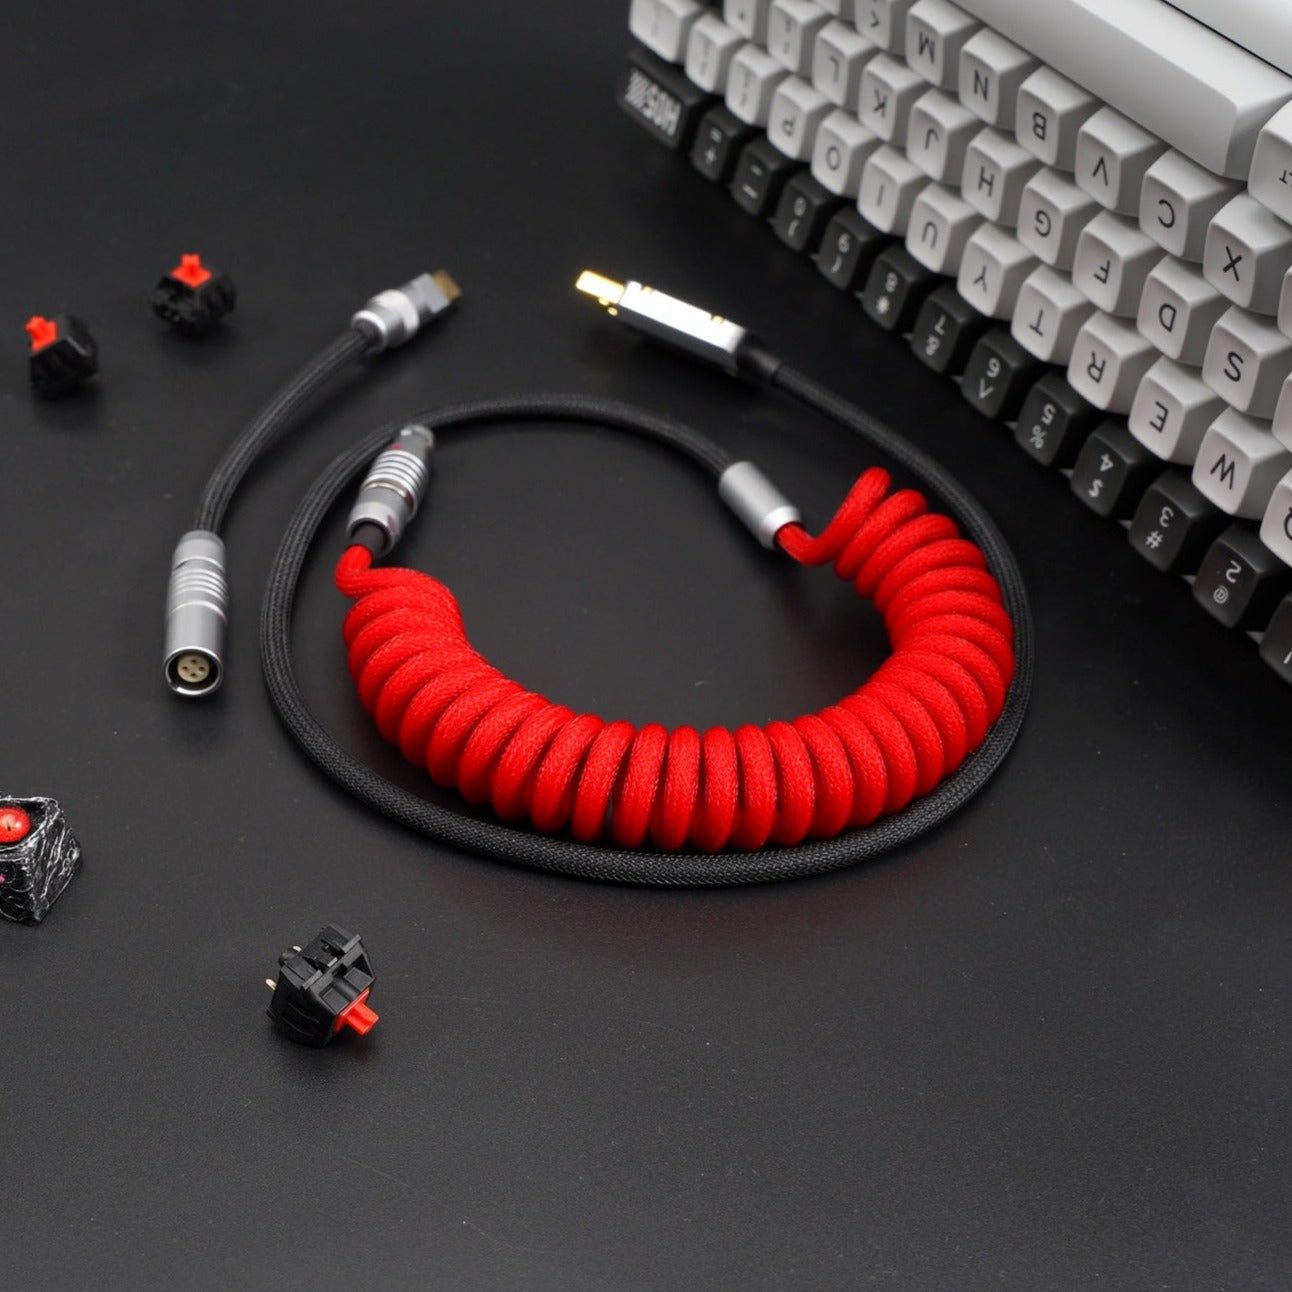 Sleeved Coiled Keyboard Aviator Cable, Lemo Style Connector - Red/Black